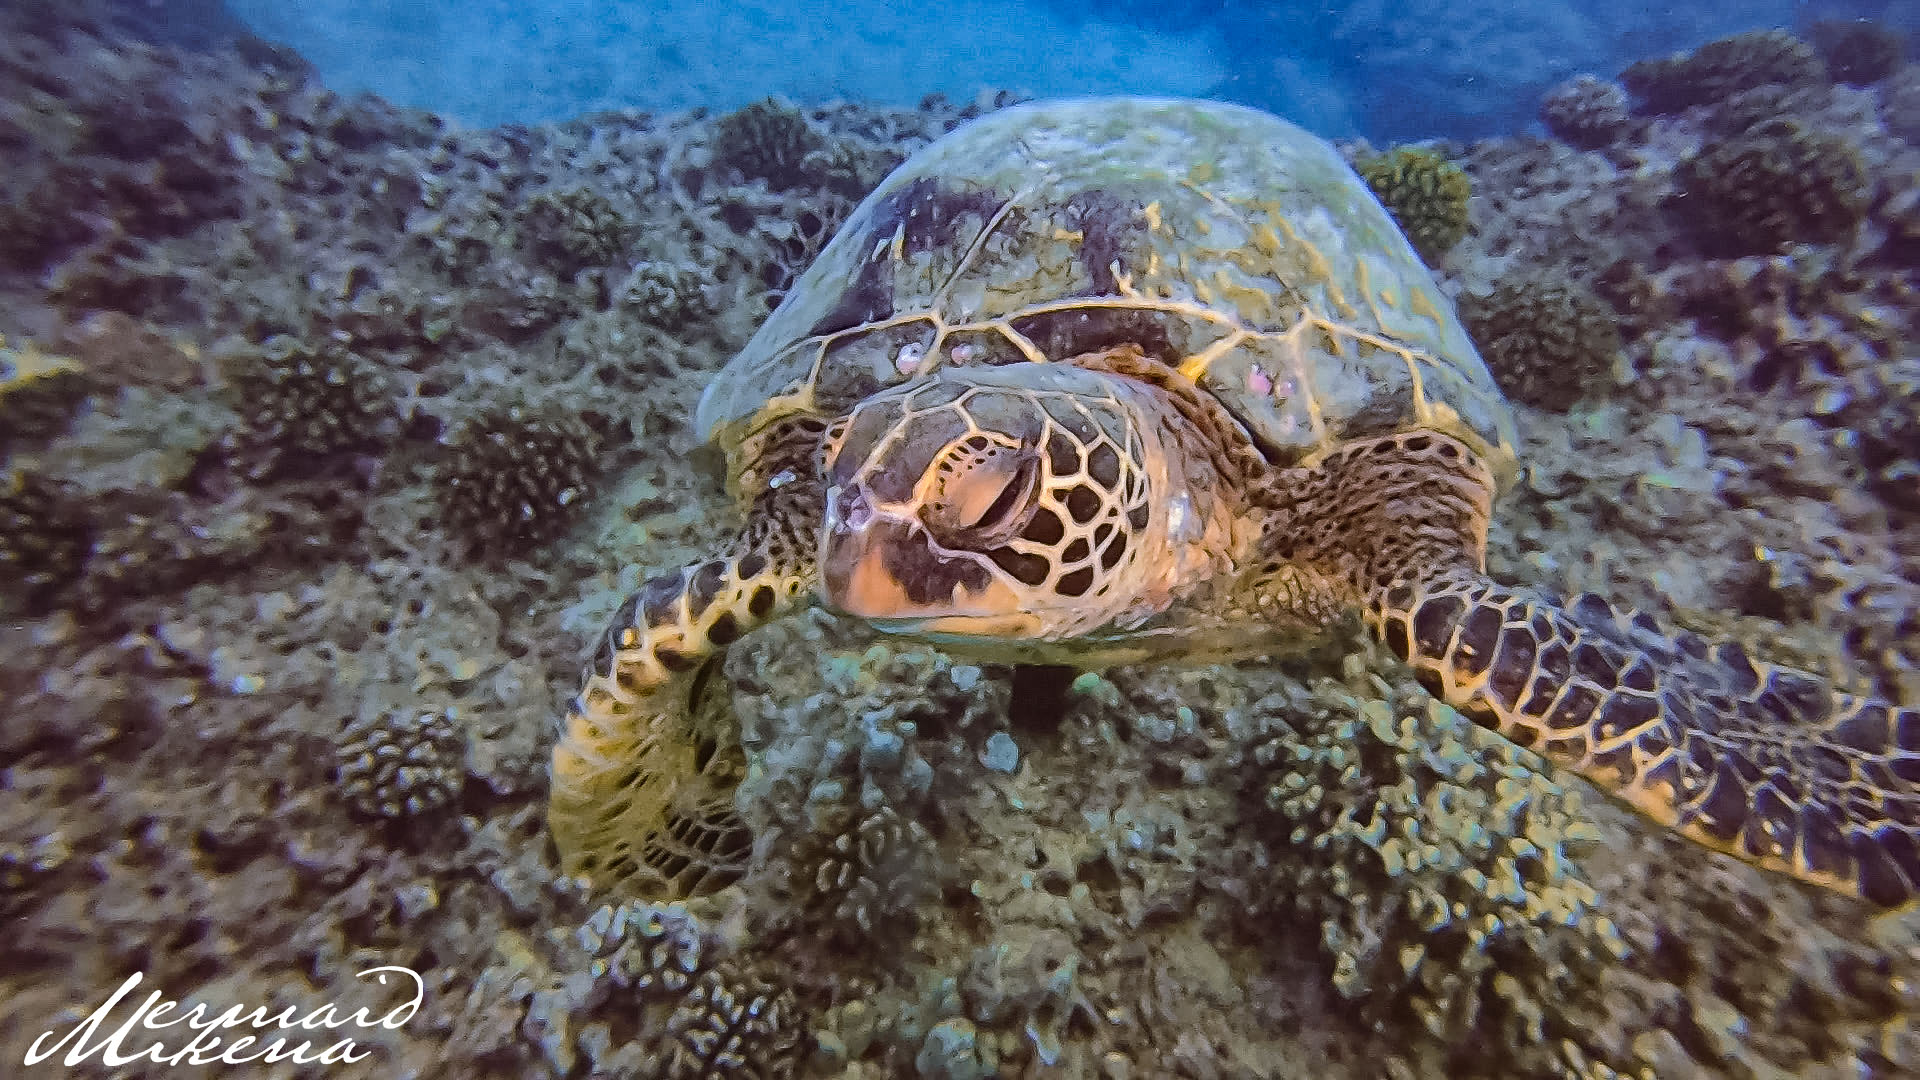 The Hawaiian Green Sea Turtle is the most common seen turtle in the waters of Hawaii